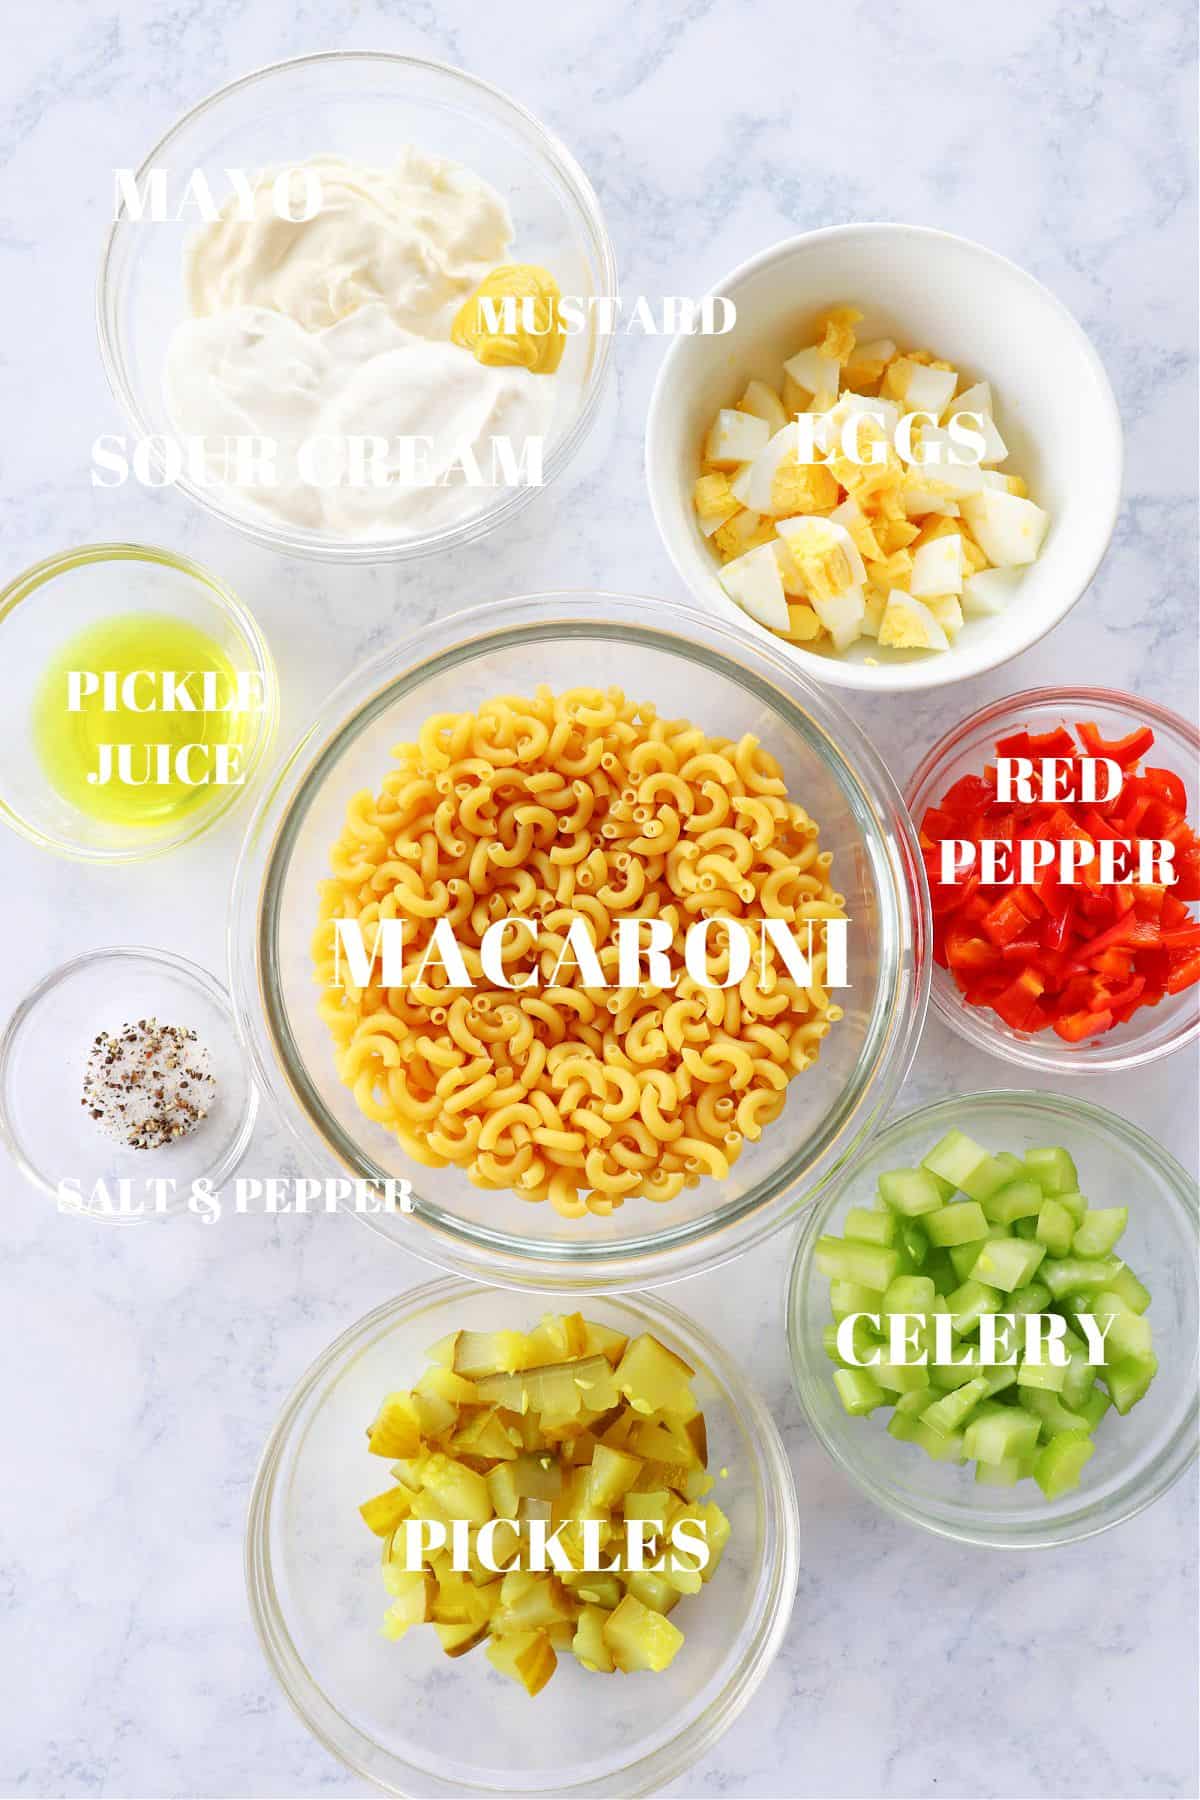 Ingredients for macaroni salad in small bowls on a board.